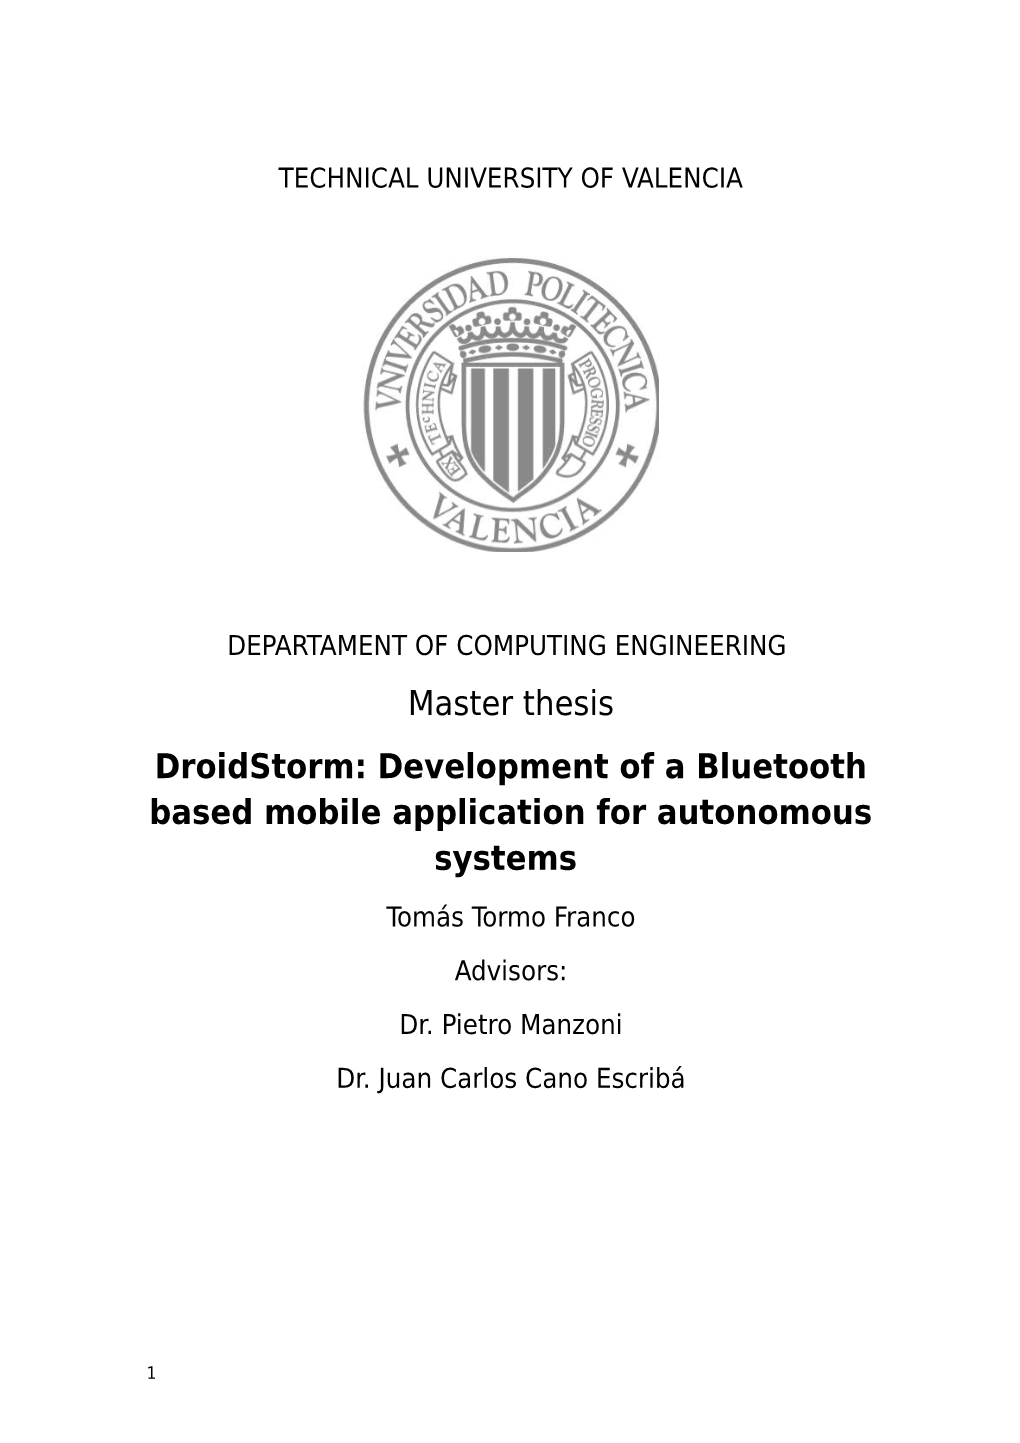 Master Thesis Droidstorm: Development of a Bluetooth Based Mobile Application for Autonomous Systems